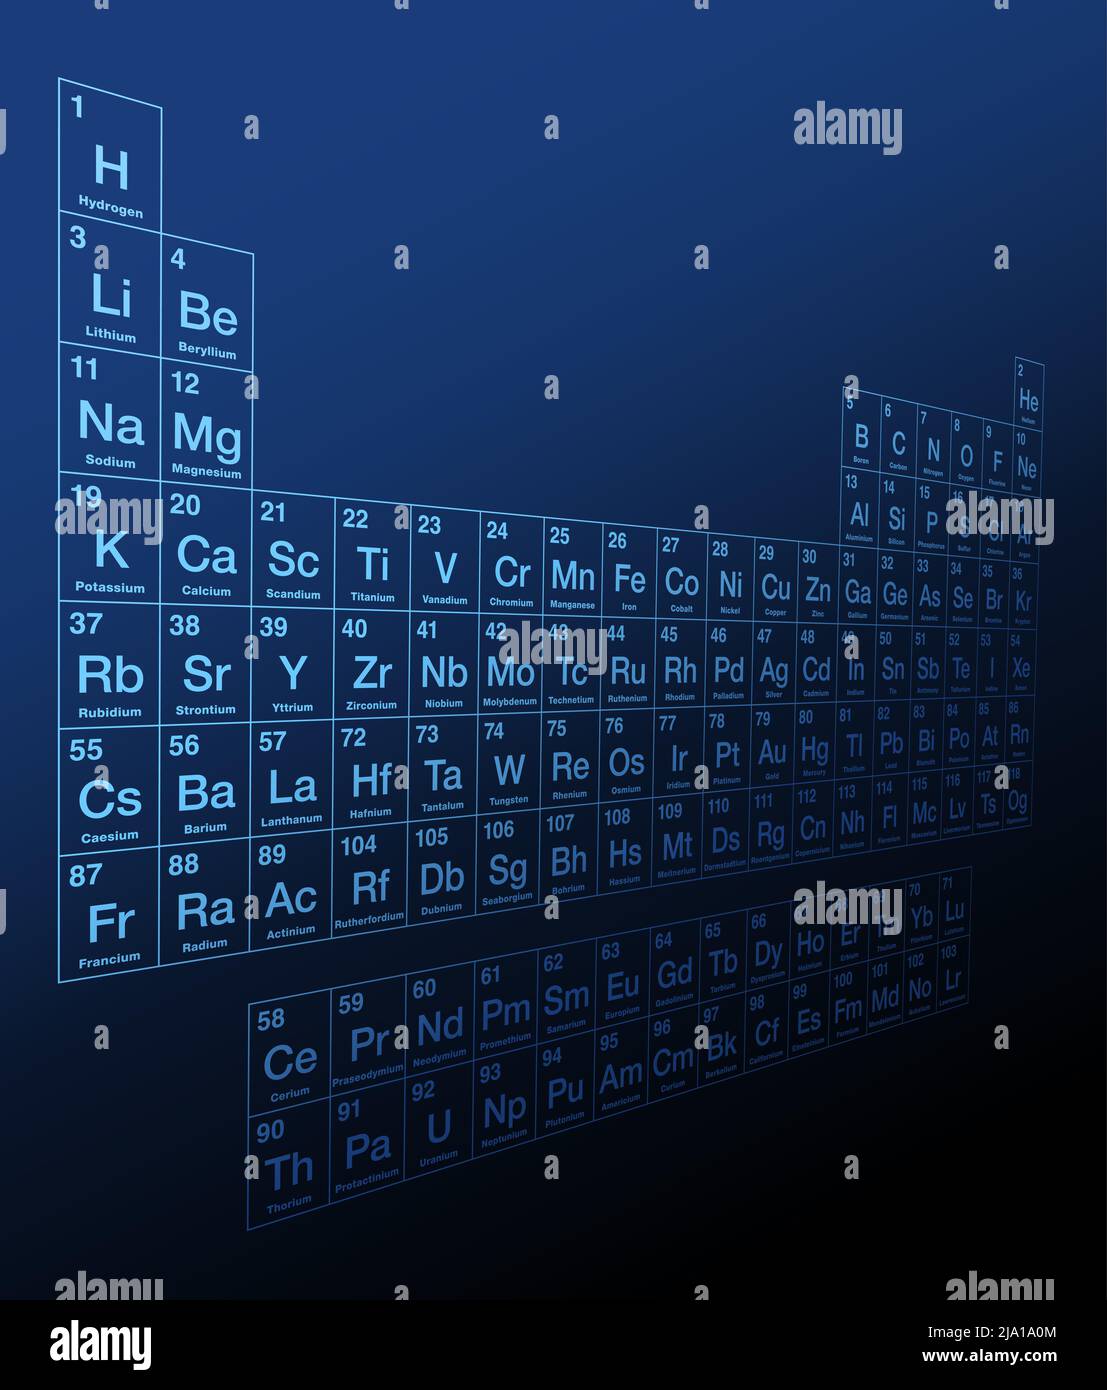 Periodic table of elements. Three dimensional side view of a blue colored Periodic table on dark blue background. Tabular display of 118 elements. Stock Photo